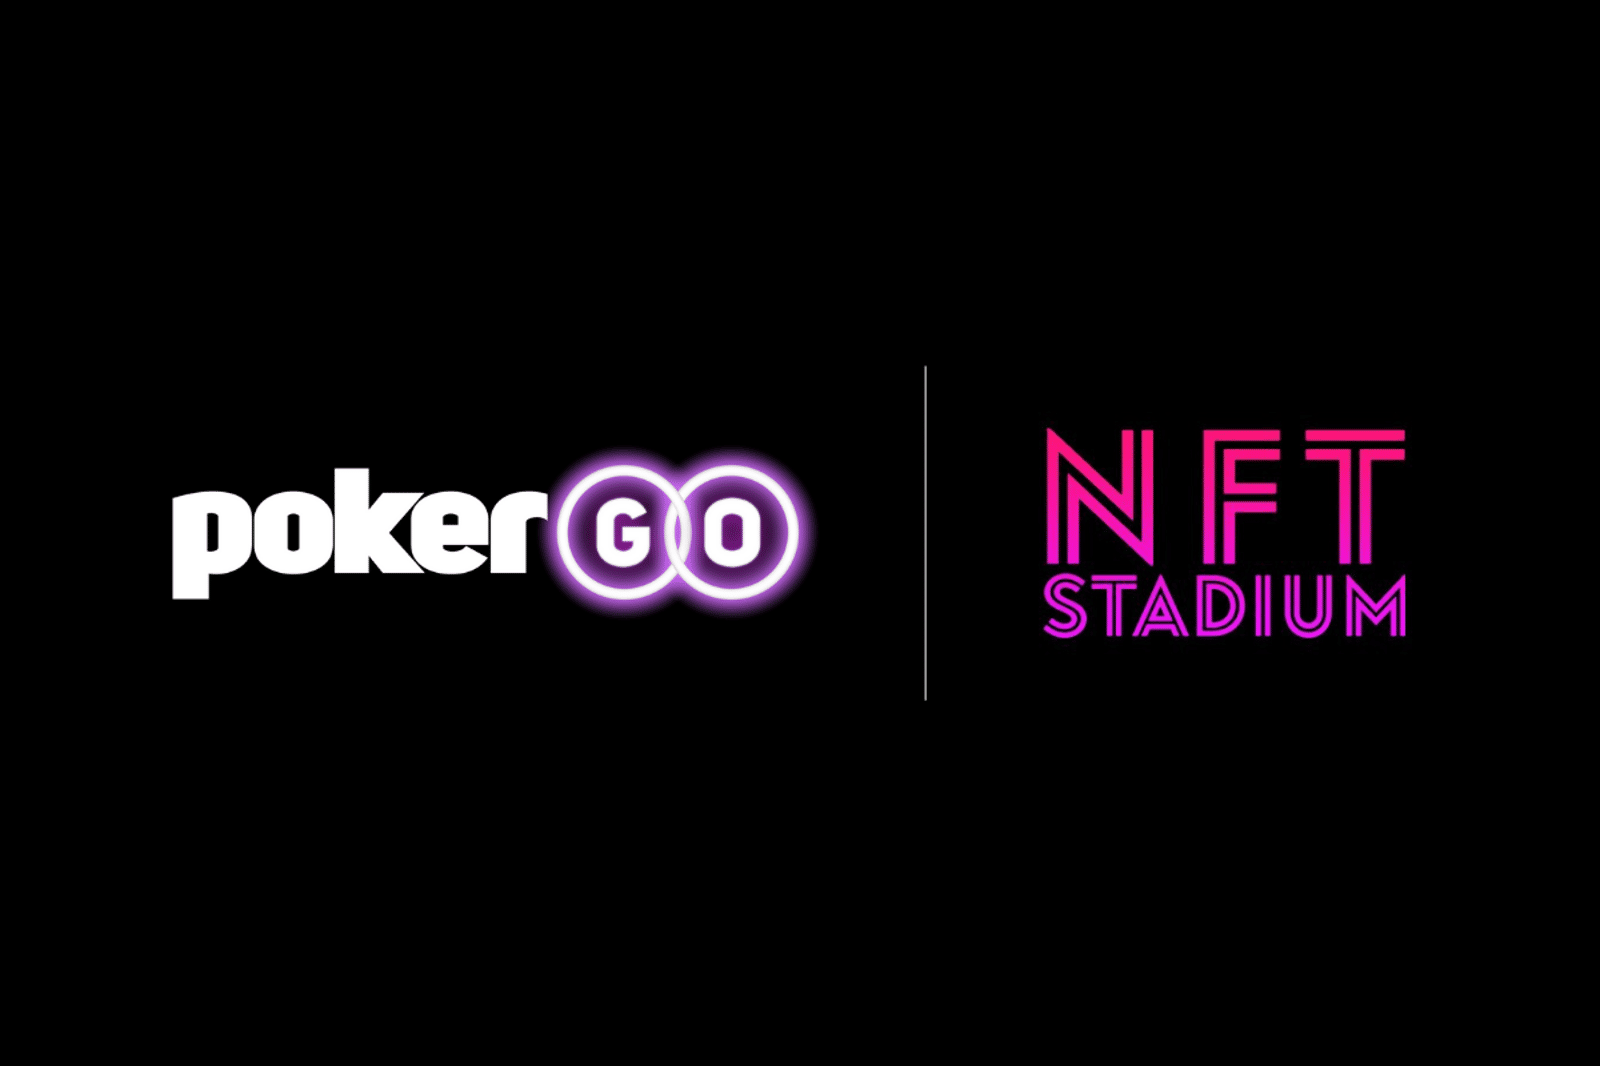 NFT Stadium Partners with PokerGO® to Launch a Groundbreaking NFT Collection